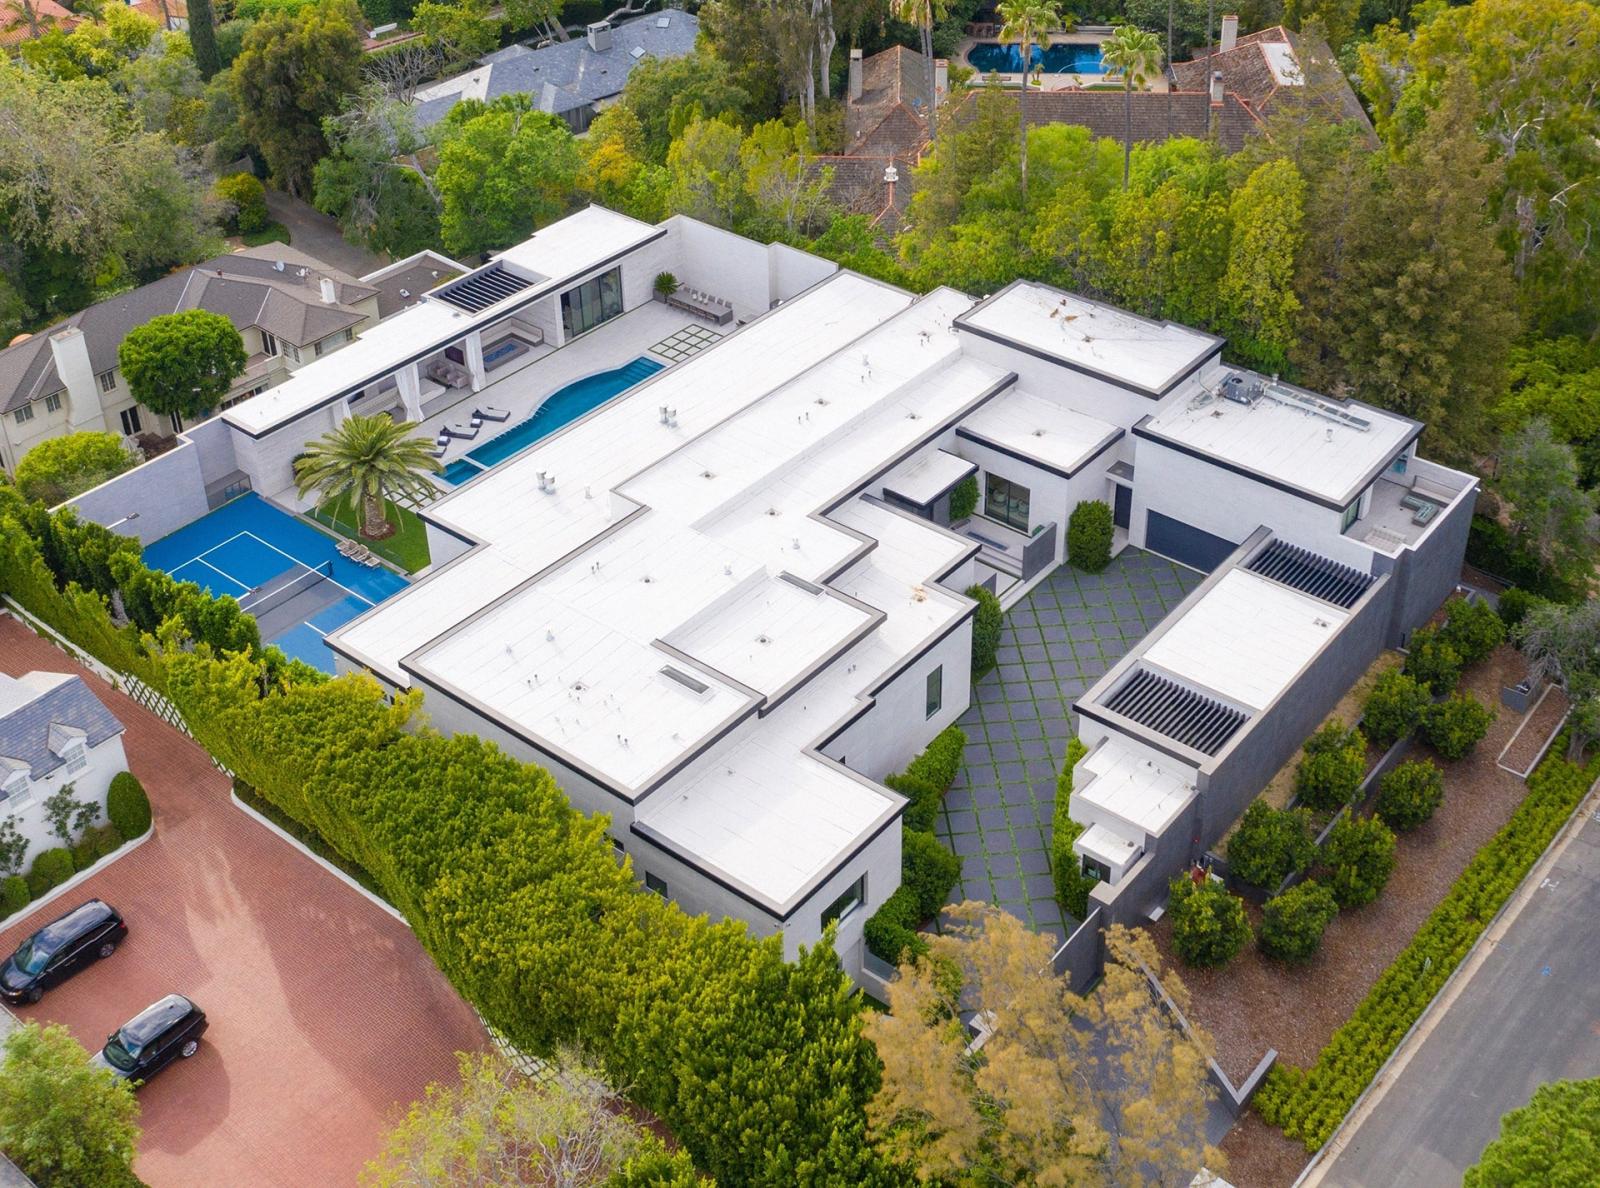 The Top 10 Outrageously Priced Celebrity Homes of 2023 - image 1